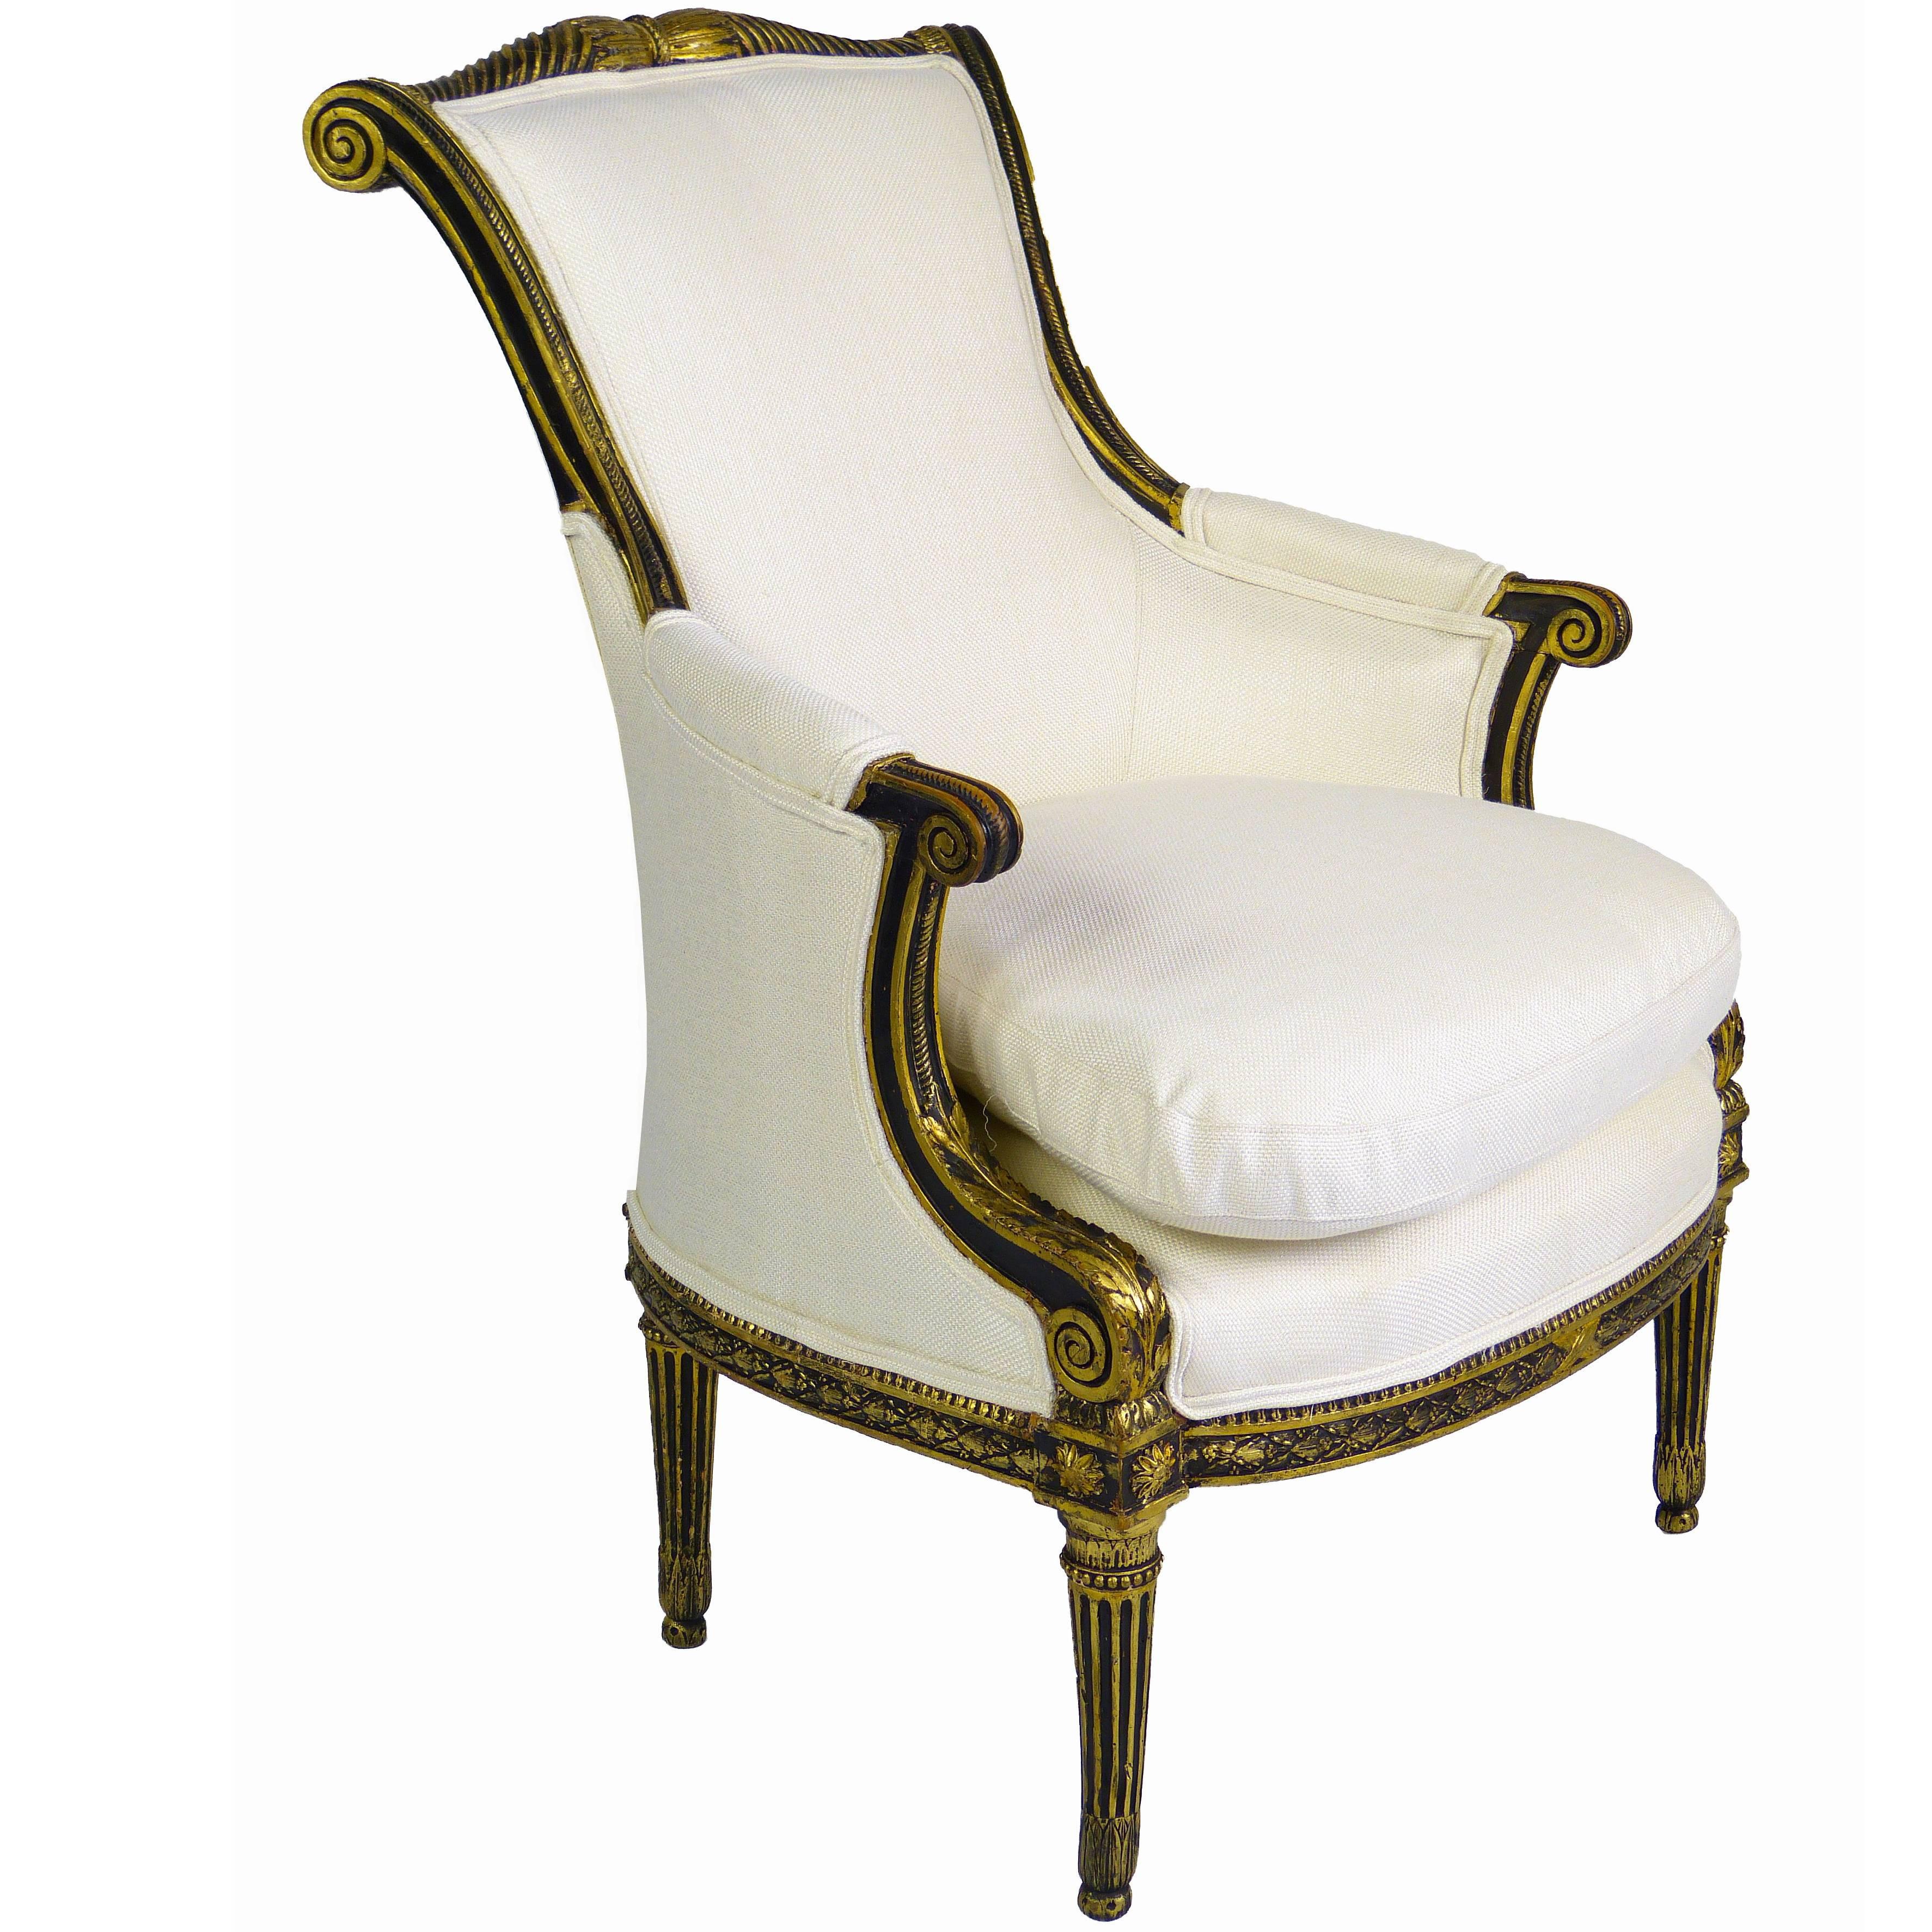 Armchair French Fauteuil 18th Century Louis XVI  by FC Menant